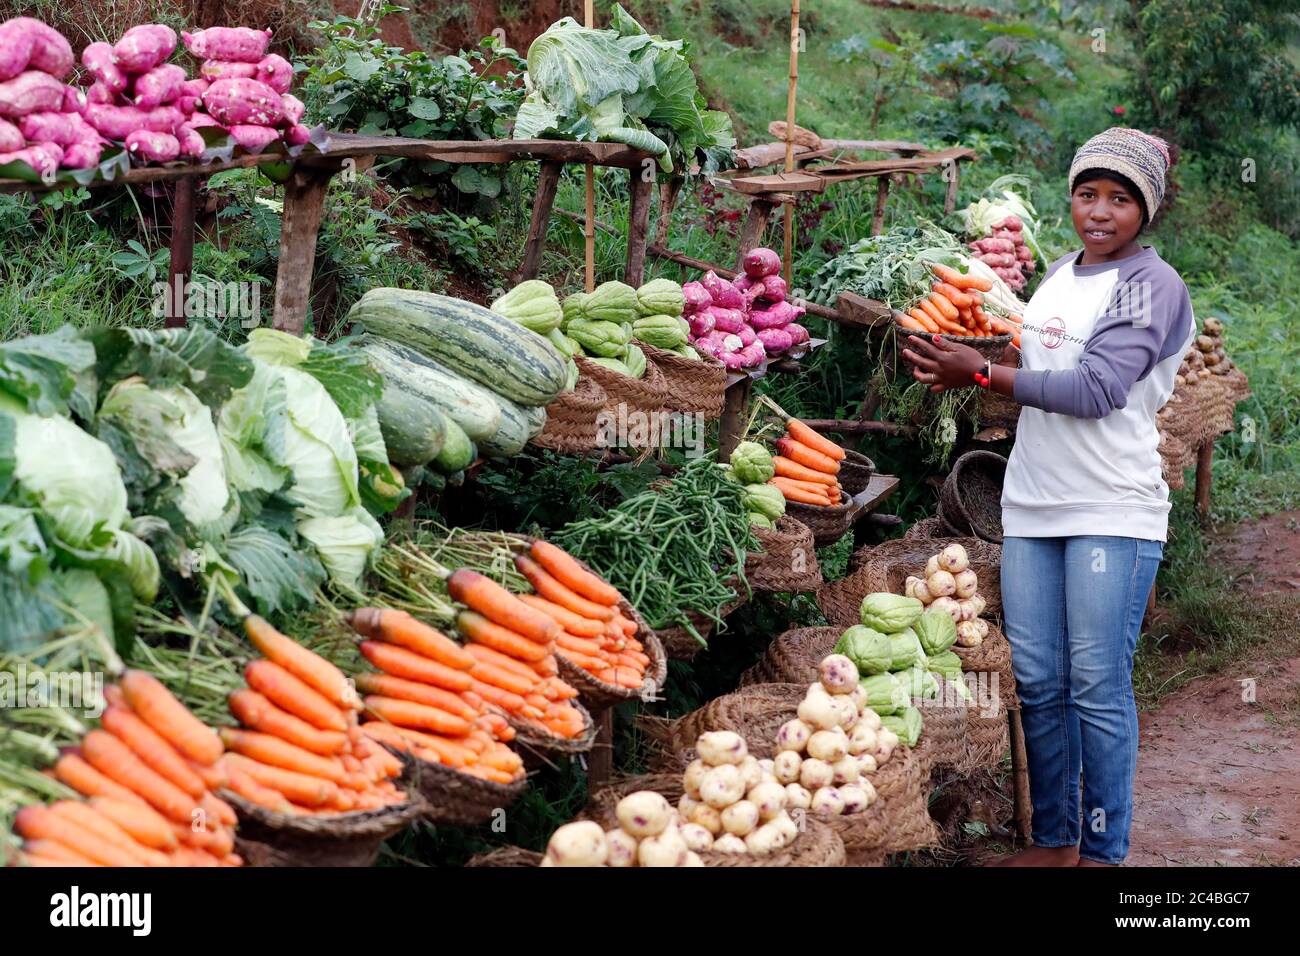 Woman selling fresh vegetables at market Stock Photo